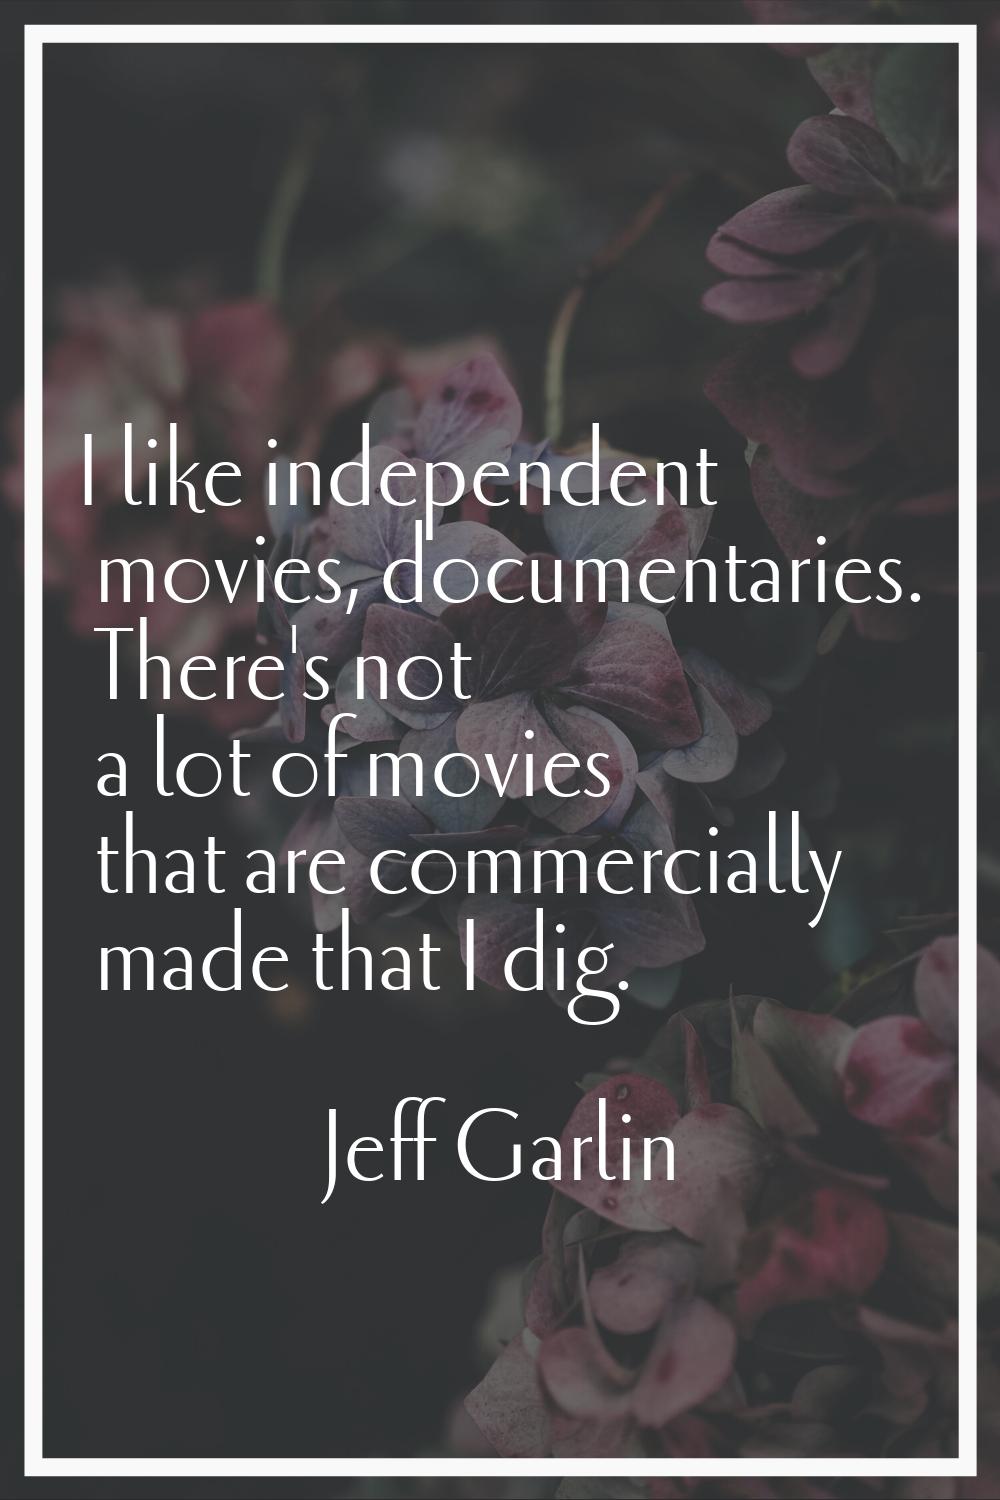 I like independent movies, documentaries. There's not a lot of movies that are commercially made th